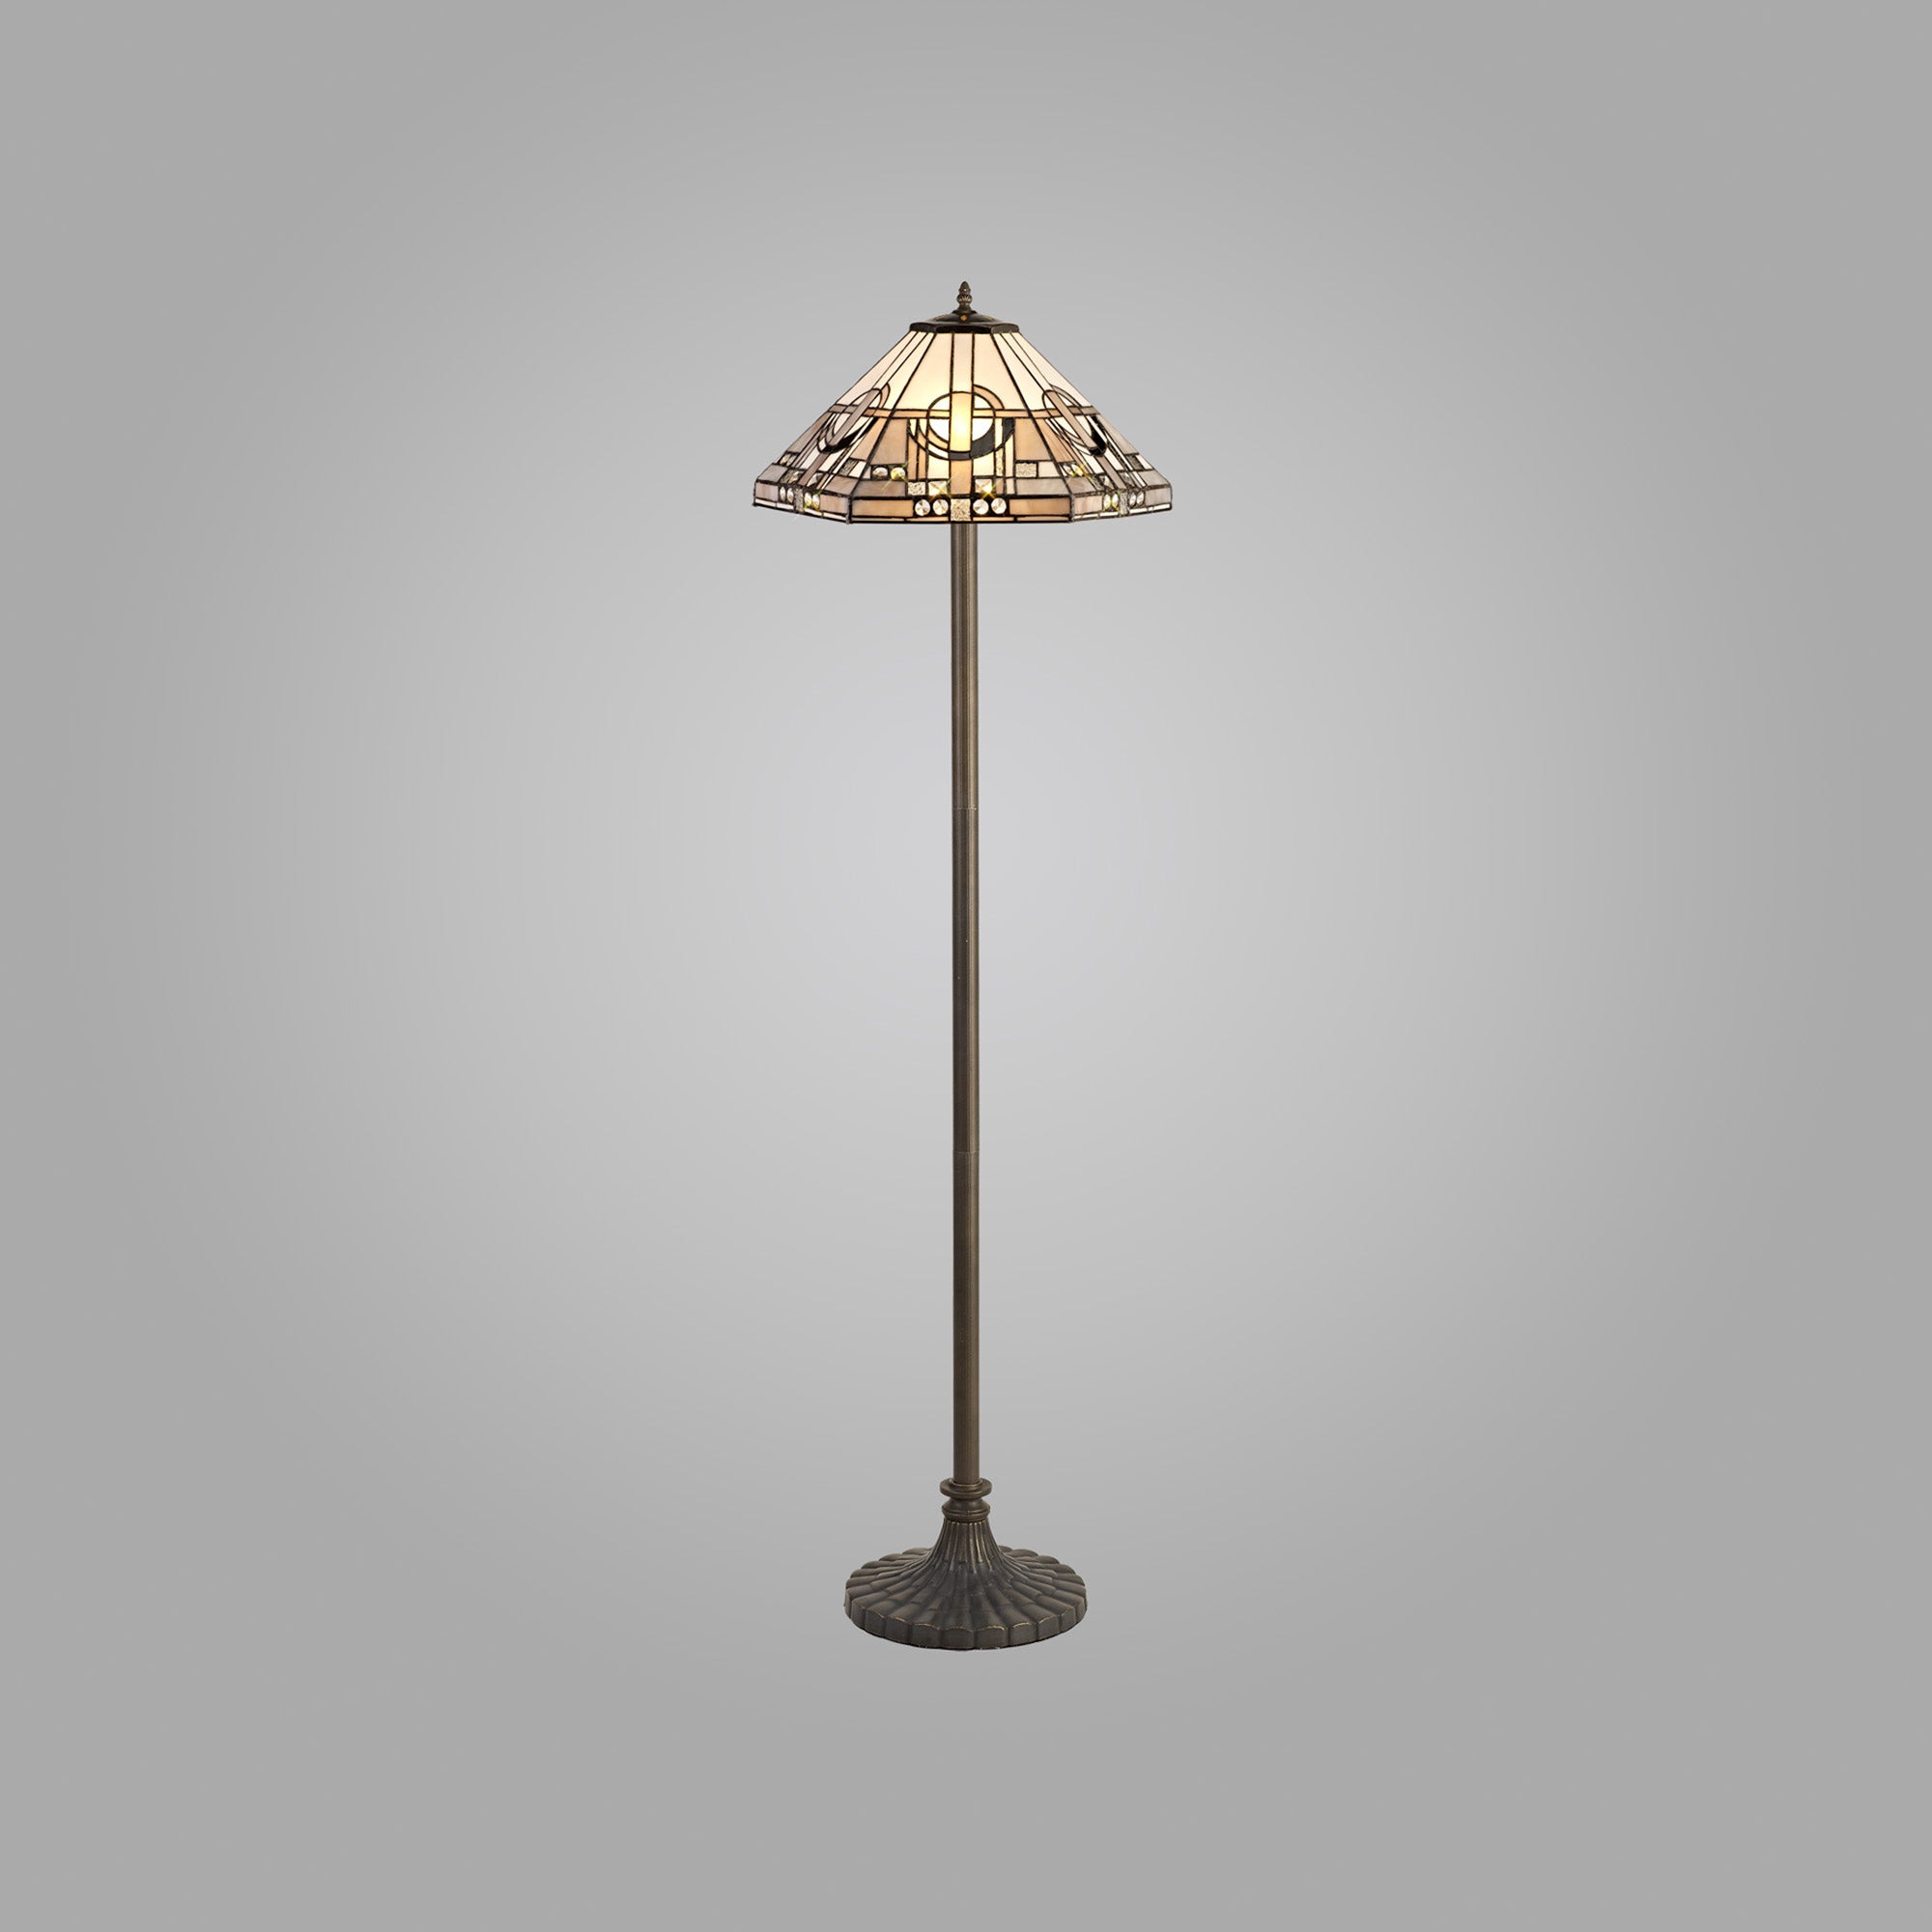 Atek 2 Light Stepped Design Floor Lamp E27 With 40cm Tiffany Shade, White/Grey/Black/Clear Crystal/Aged Antique Brass